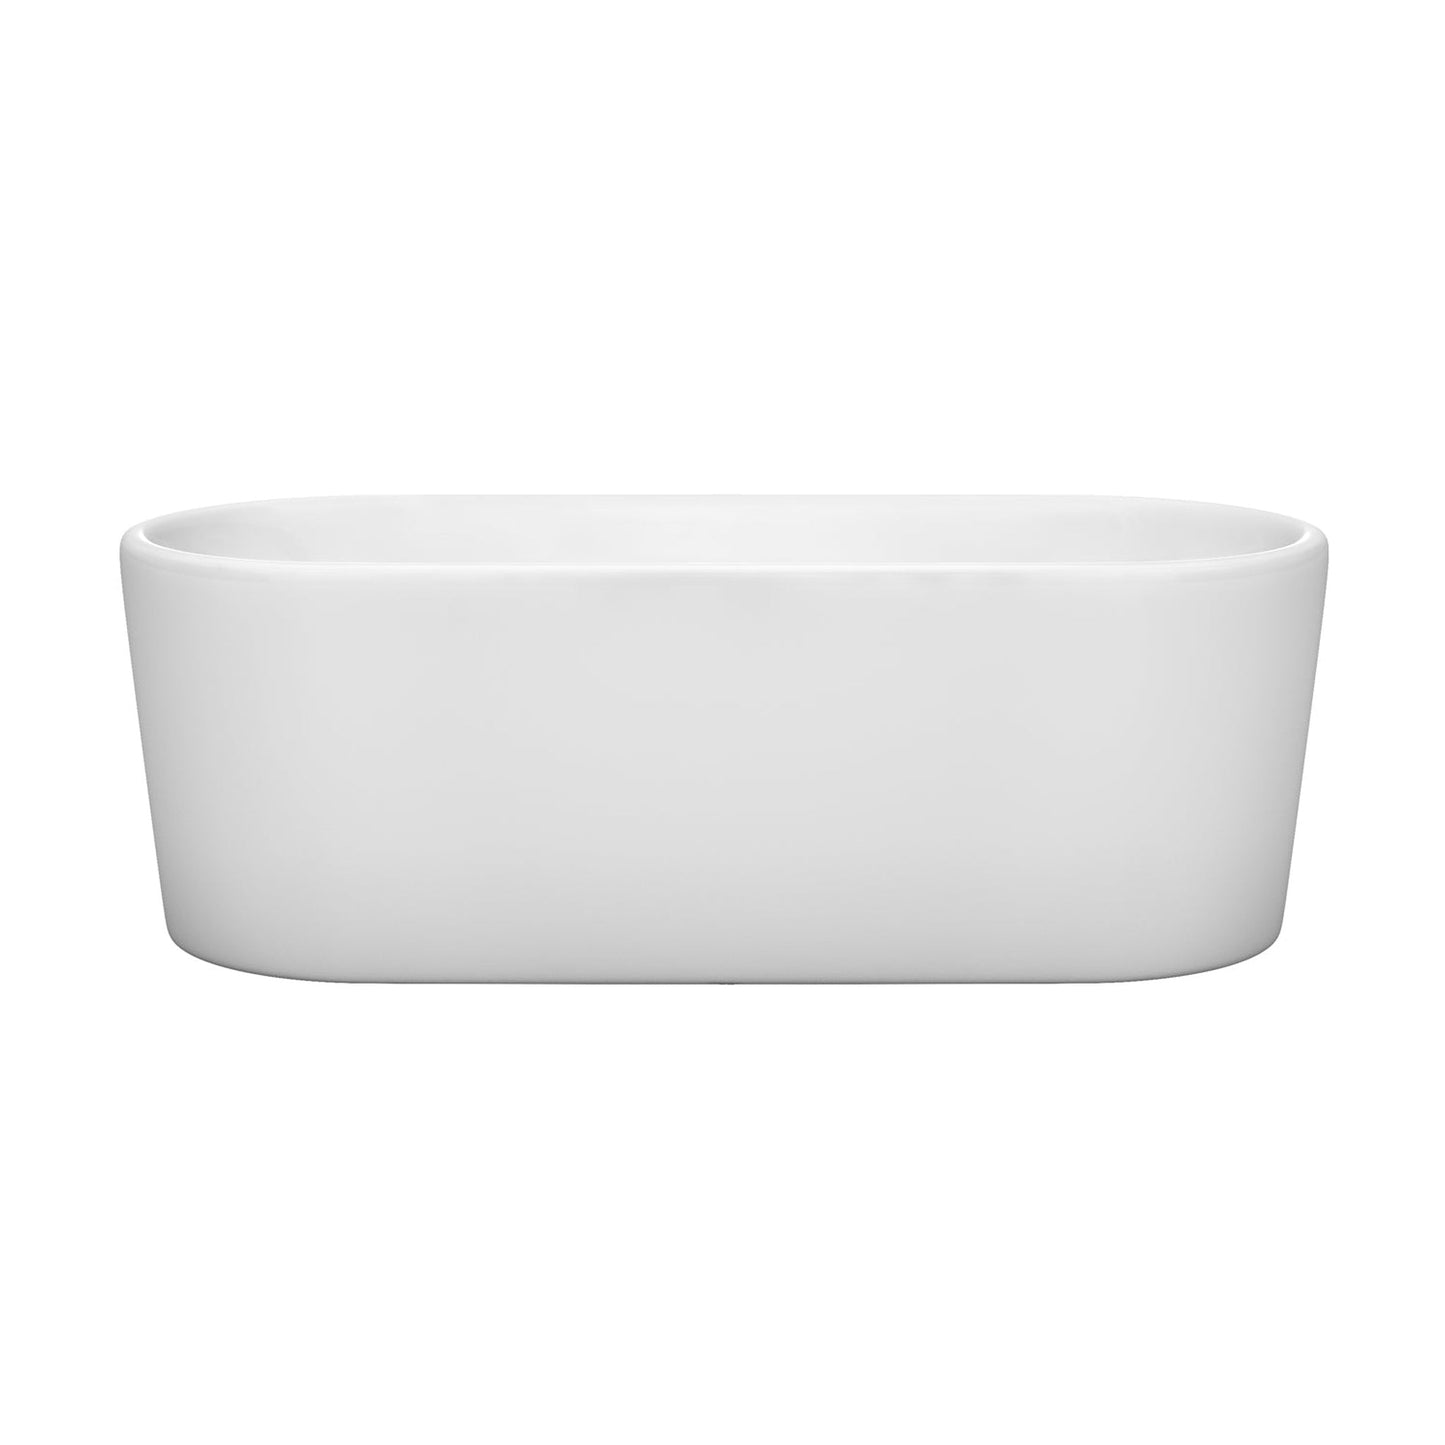 Wyndham Collection Ursula 67" Freestanding Bathtub in White With Shiny White Drain and Overflow Trim